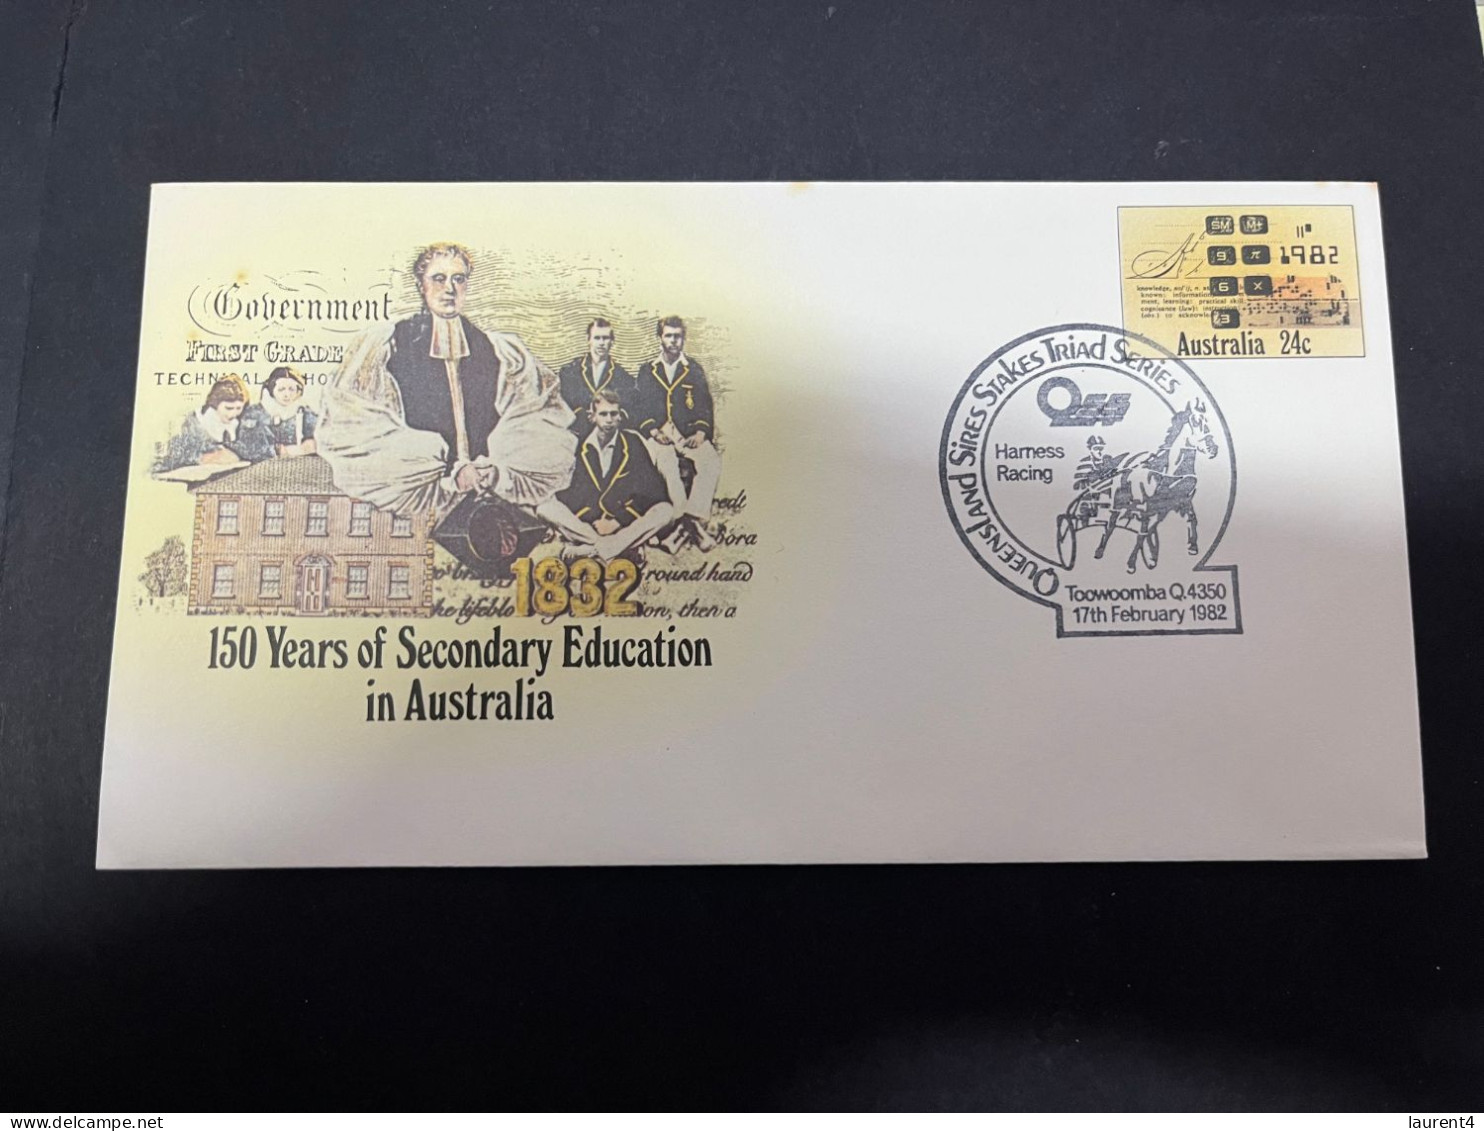 21-4-2024 (2 Z 39) Australia FDC Cover - 1982 - Harness Horse Racing In Queensland (Secondary Education) - Ersttagsbelege (FDC)